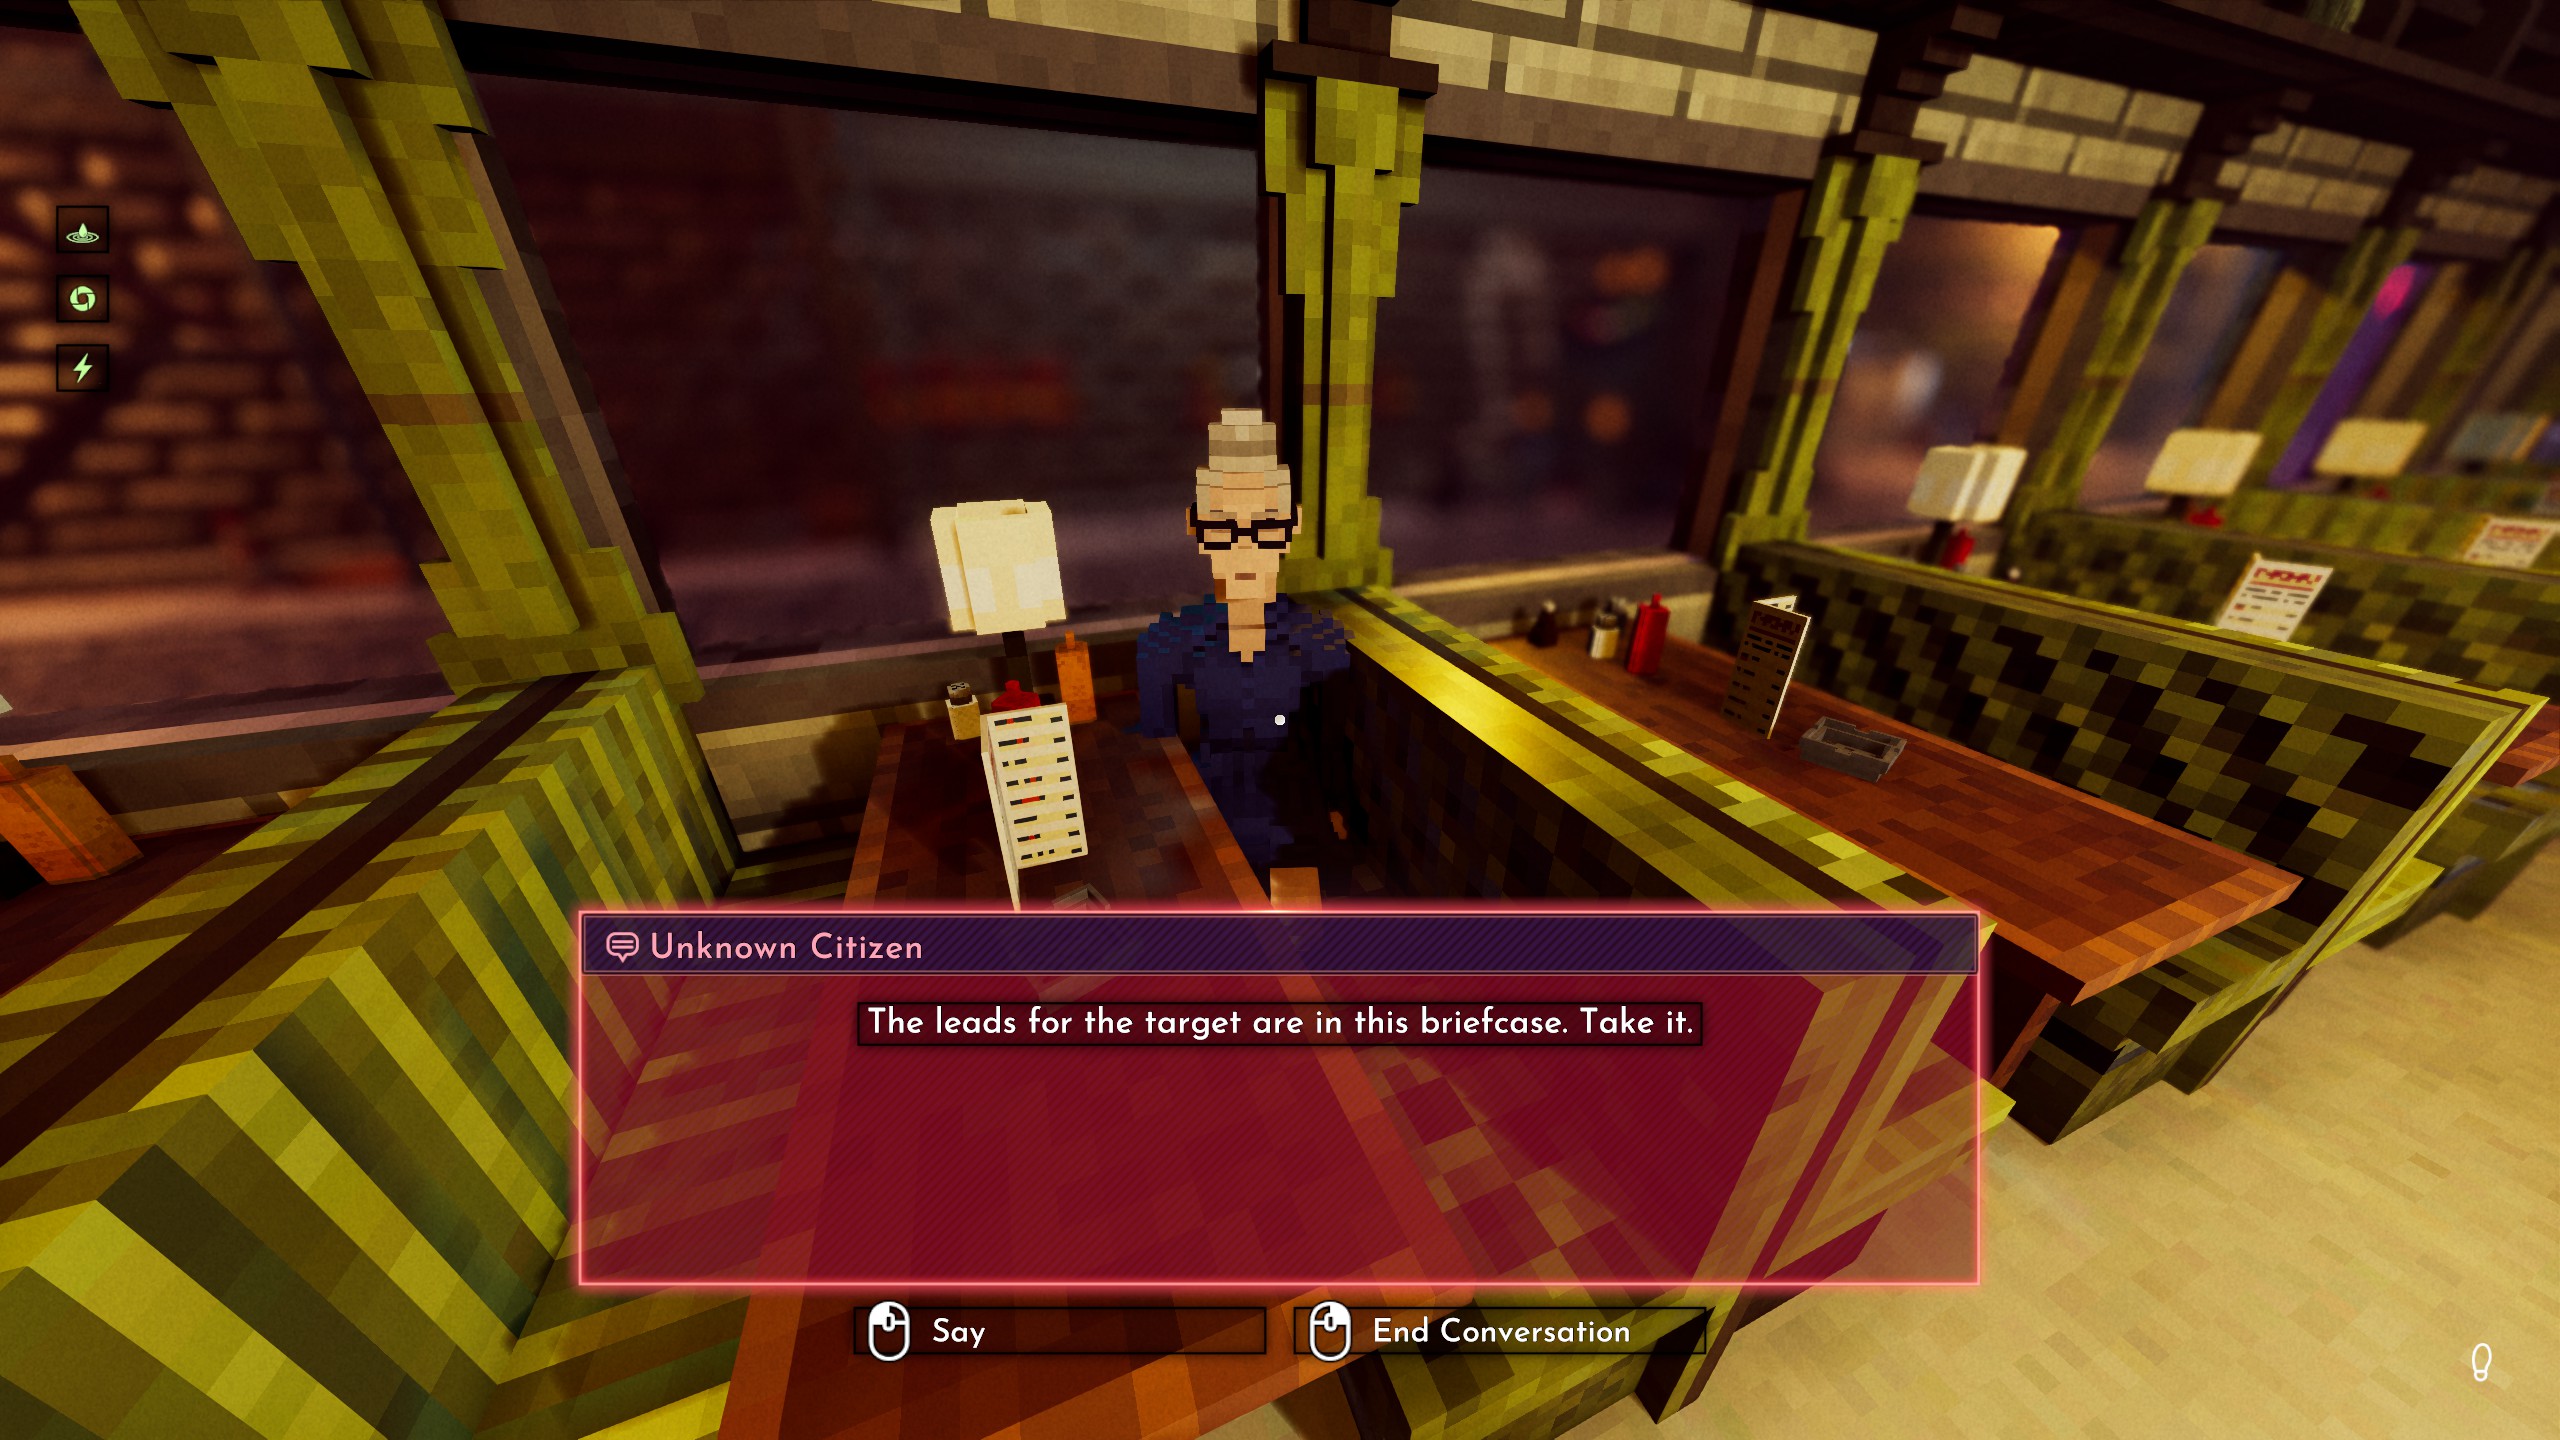 A woman gives the player a mission and a briefcase in Shadows of Doubt.